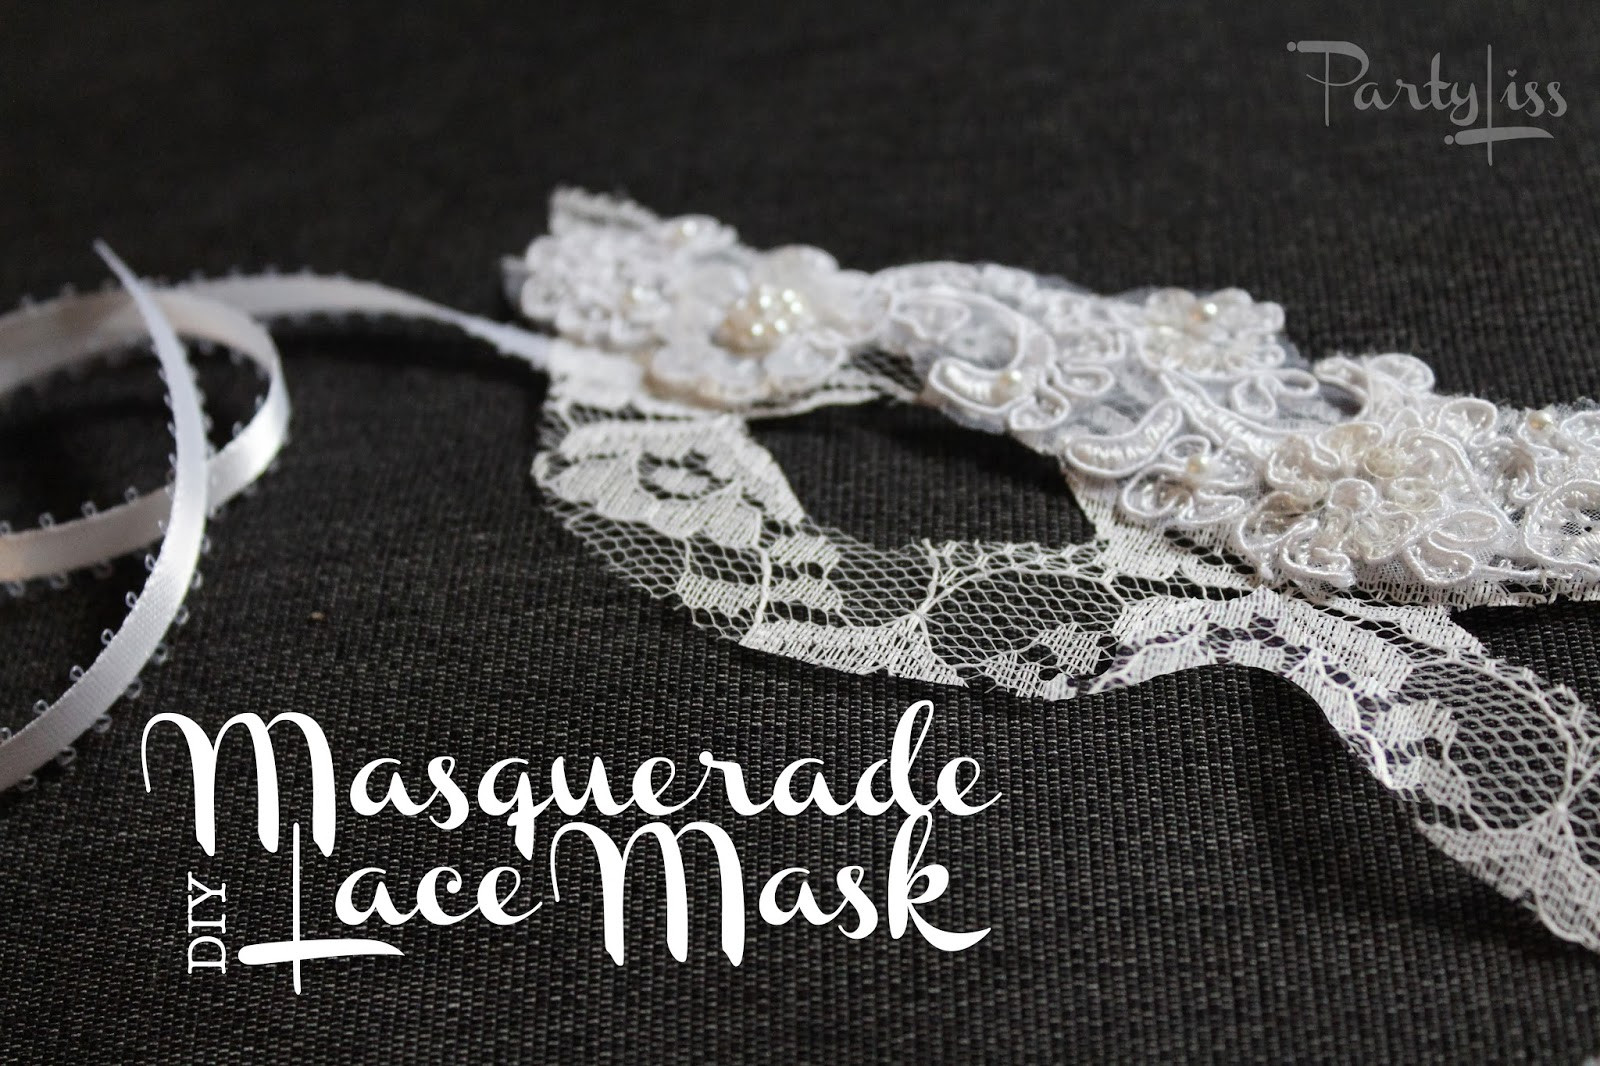 DIY Lace Masquerade Mask
 PARTYLISS DIY Lace Mask